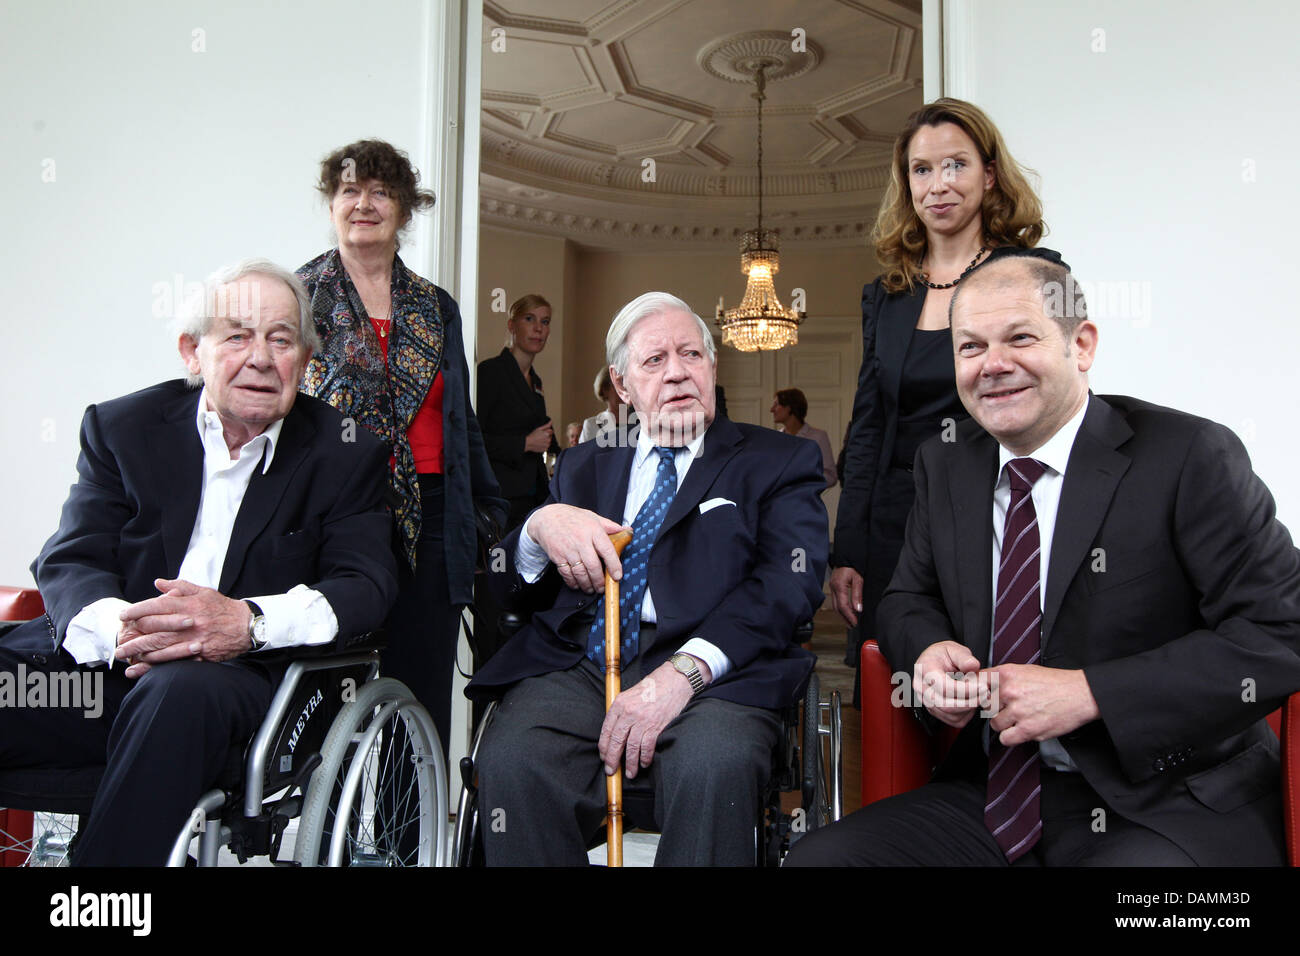 On the occassion of his 85th birthday  the writer and honorary citizen of Hamburg, Siegfried Lenz (L-R), sits next to his wife Ulla, former chancellor Helmut Schmidt, Carola Veit, president of Hamburg citizenship and mayor Olaf Scholz inside the guests house of the senat in Hamburg, Germany, 22 June 2011. Lenz celebrated his birthday on 17 March 2011. Photo: ULRICH PERREY Stock Photo